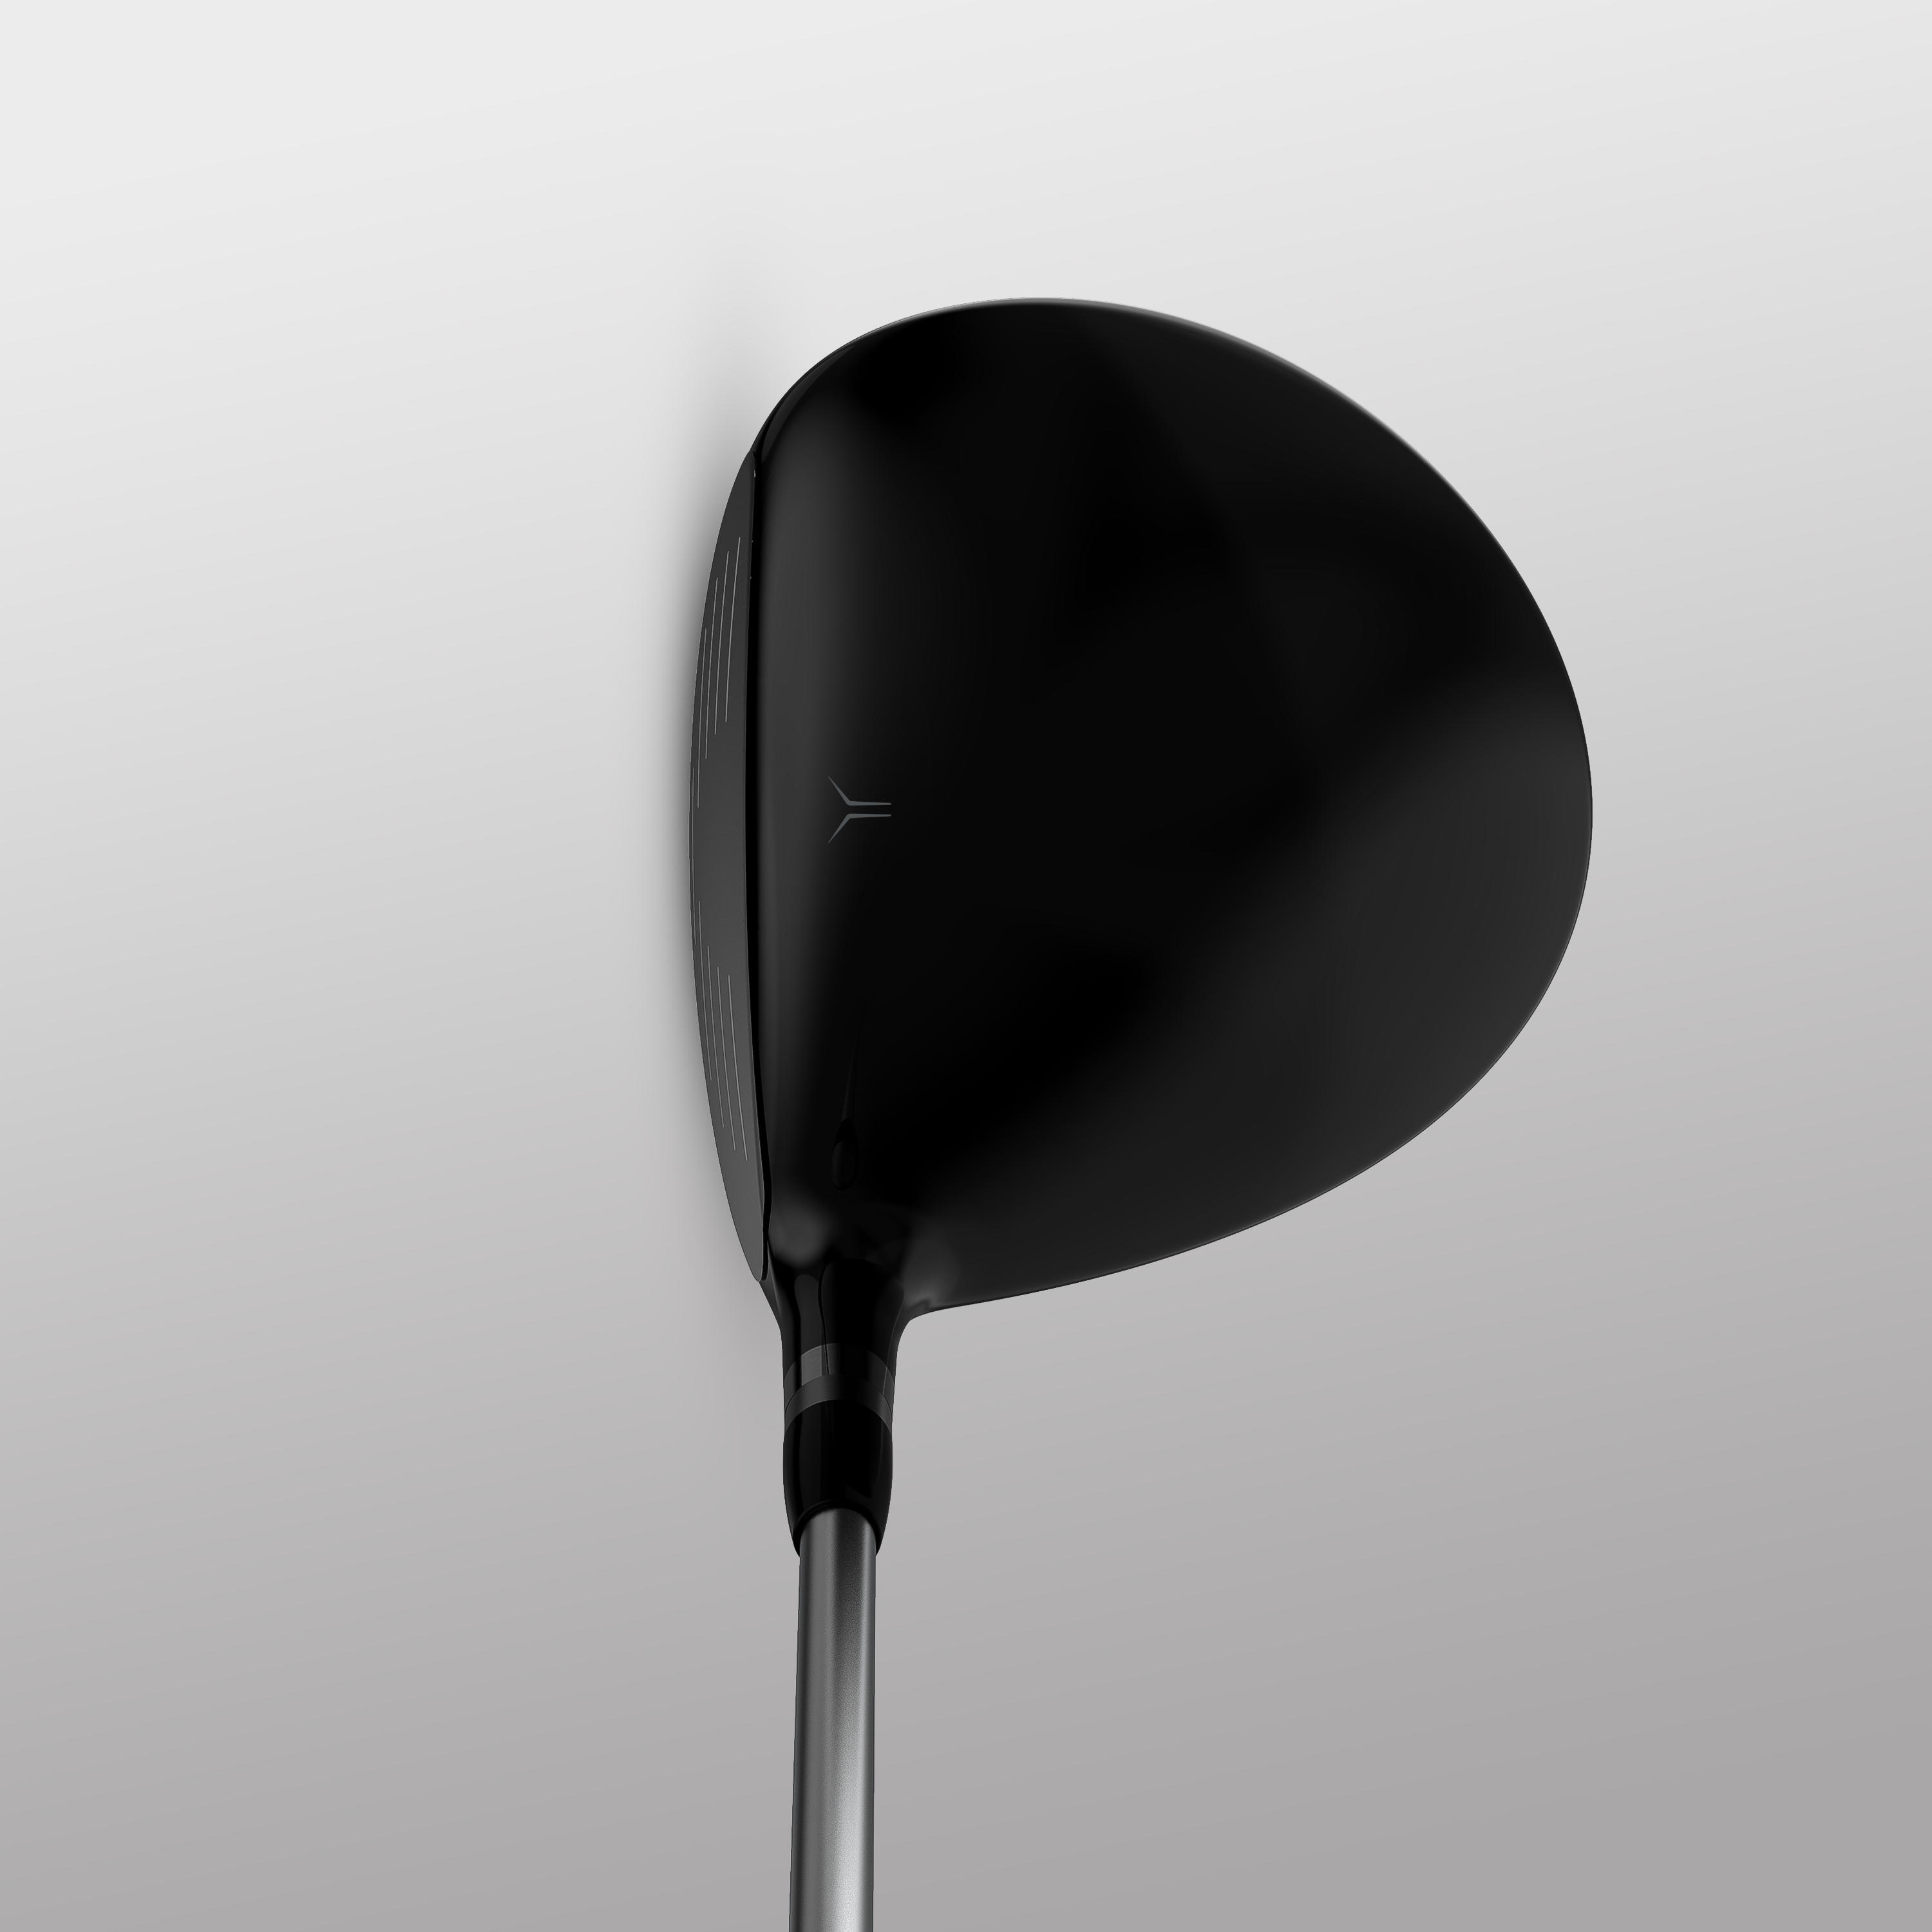 Golf driver right-handed size 2 high speed - INESIS 500 2/8